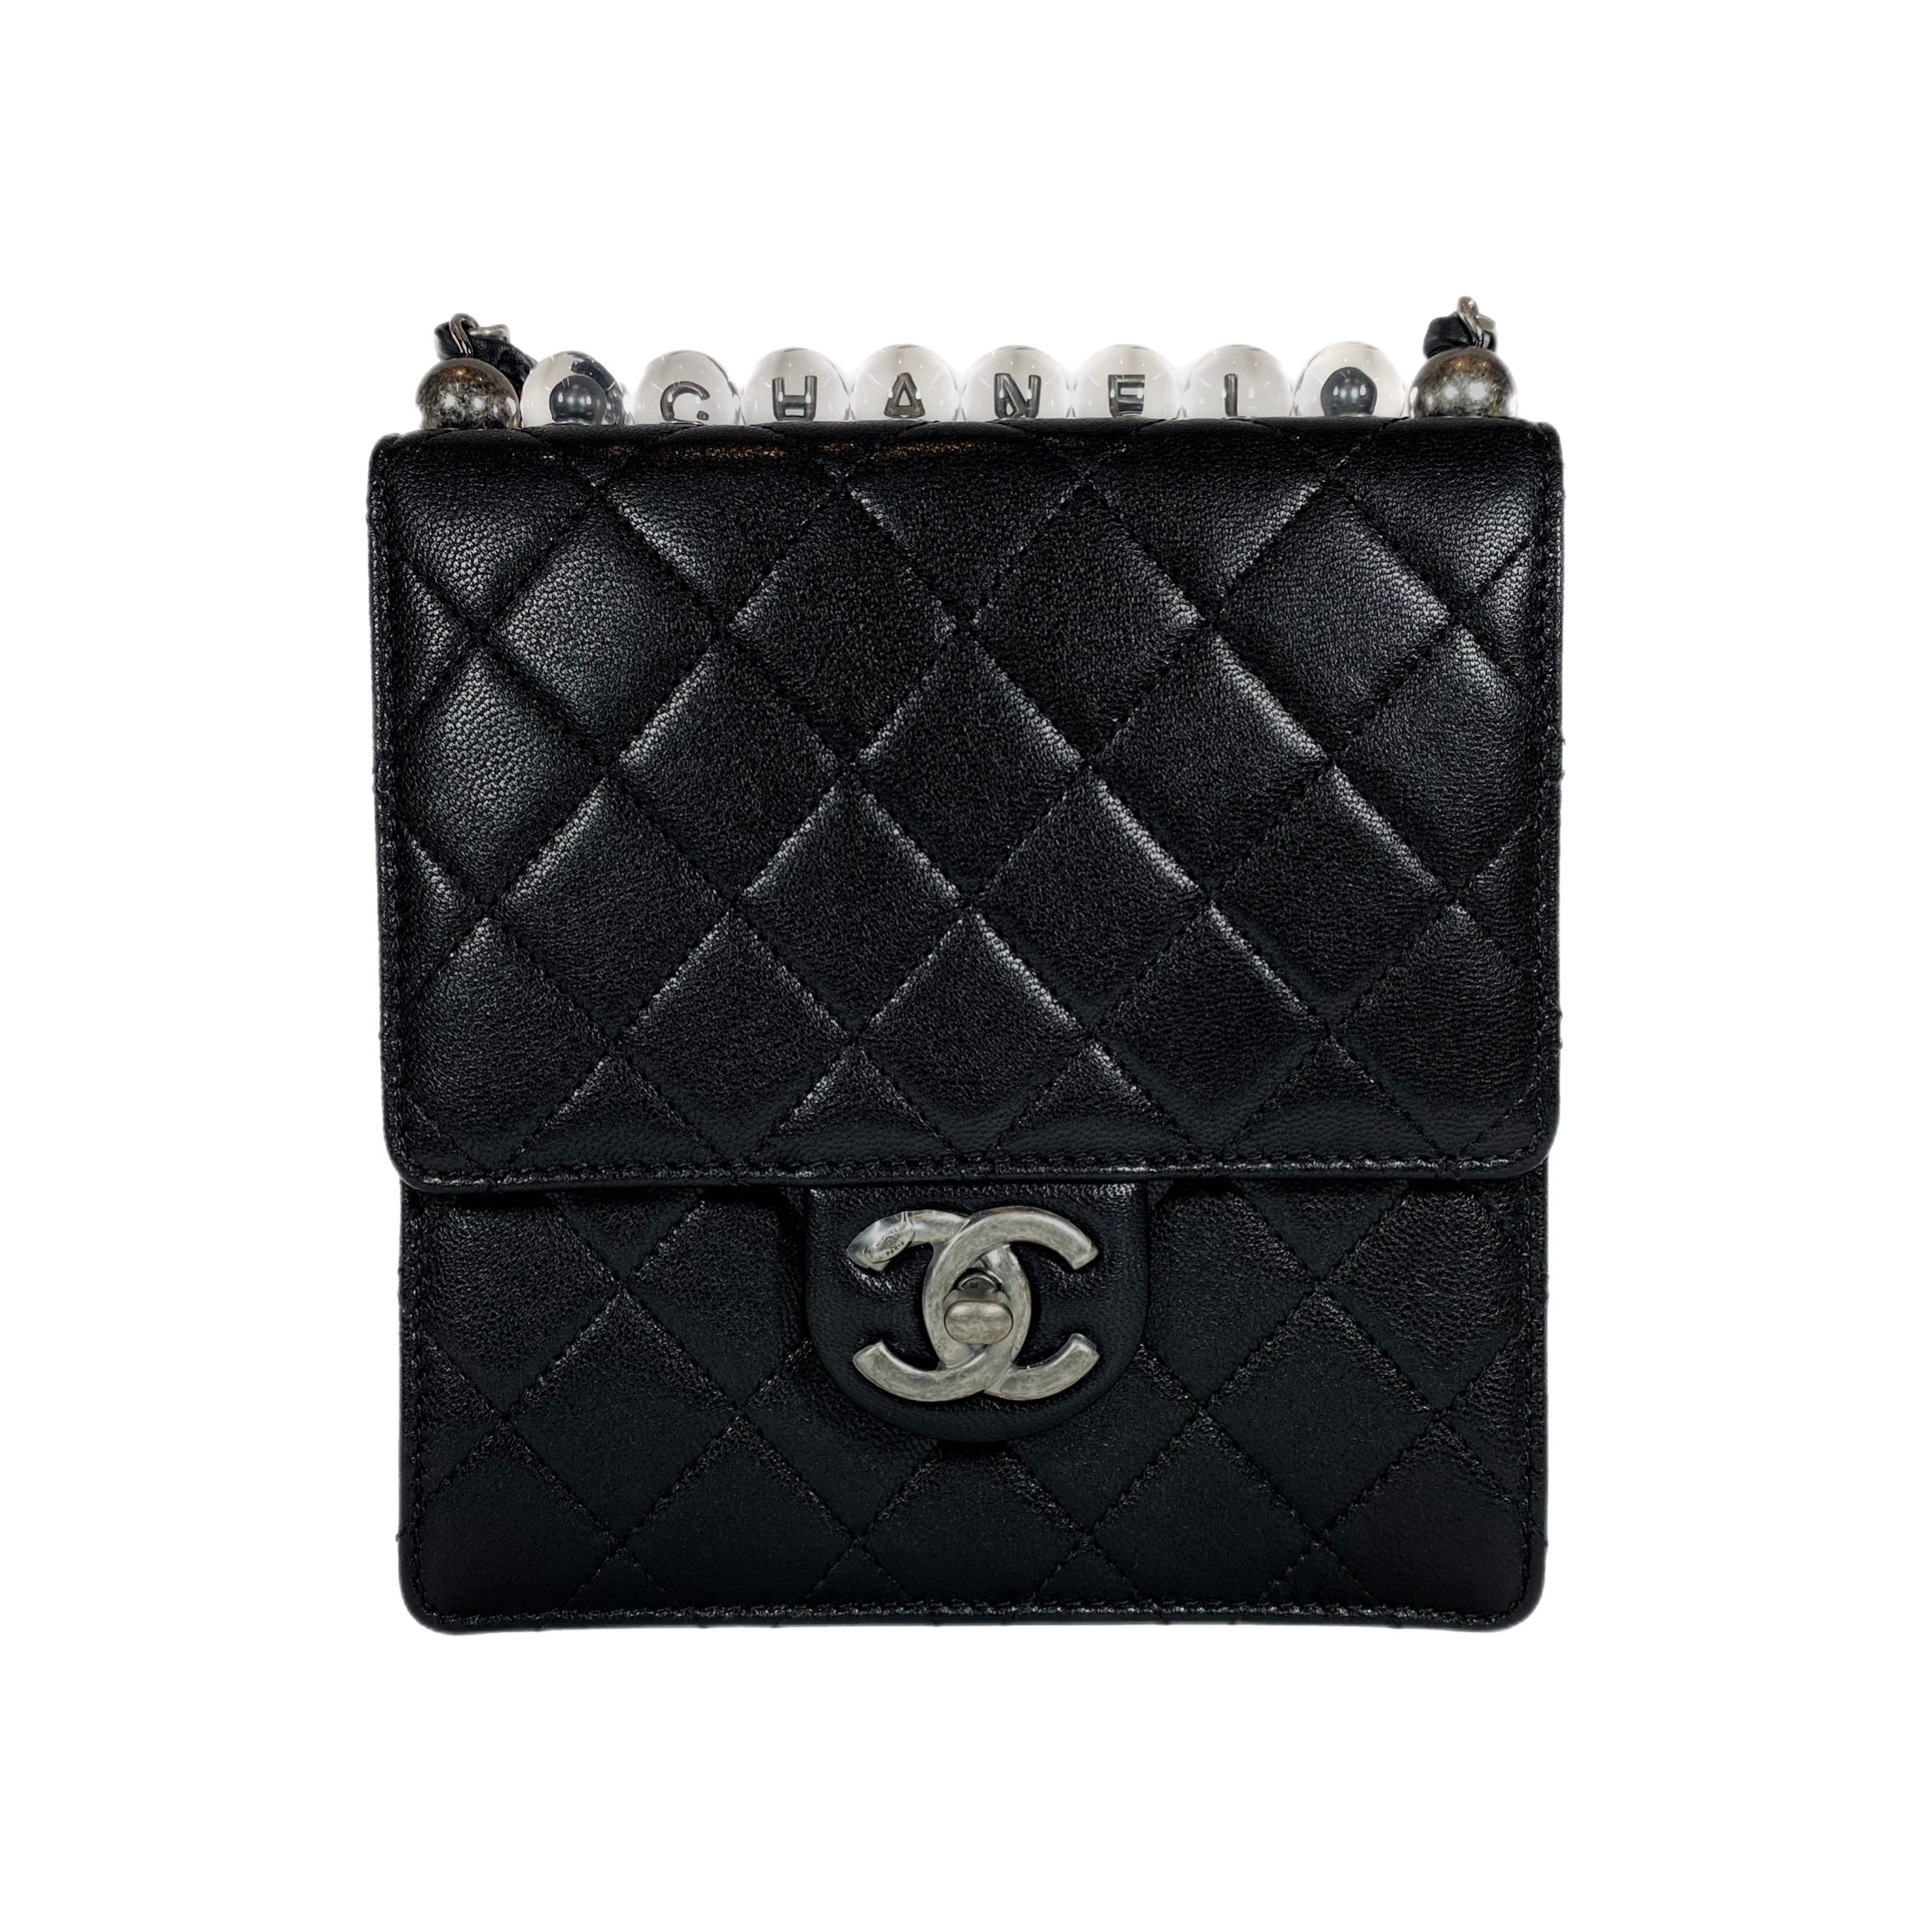 Chanel Chic Pearls Flap Bag